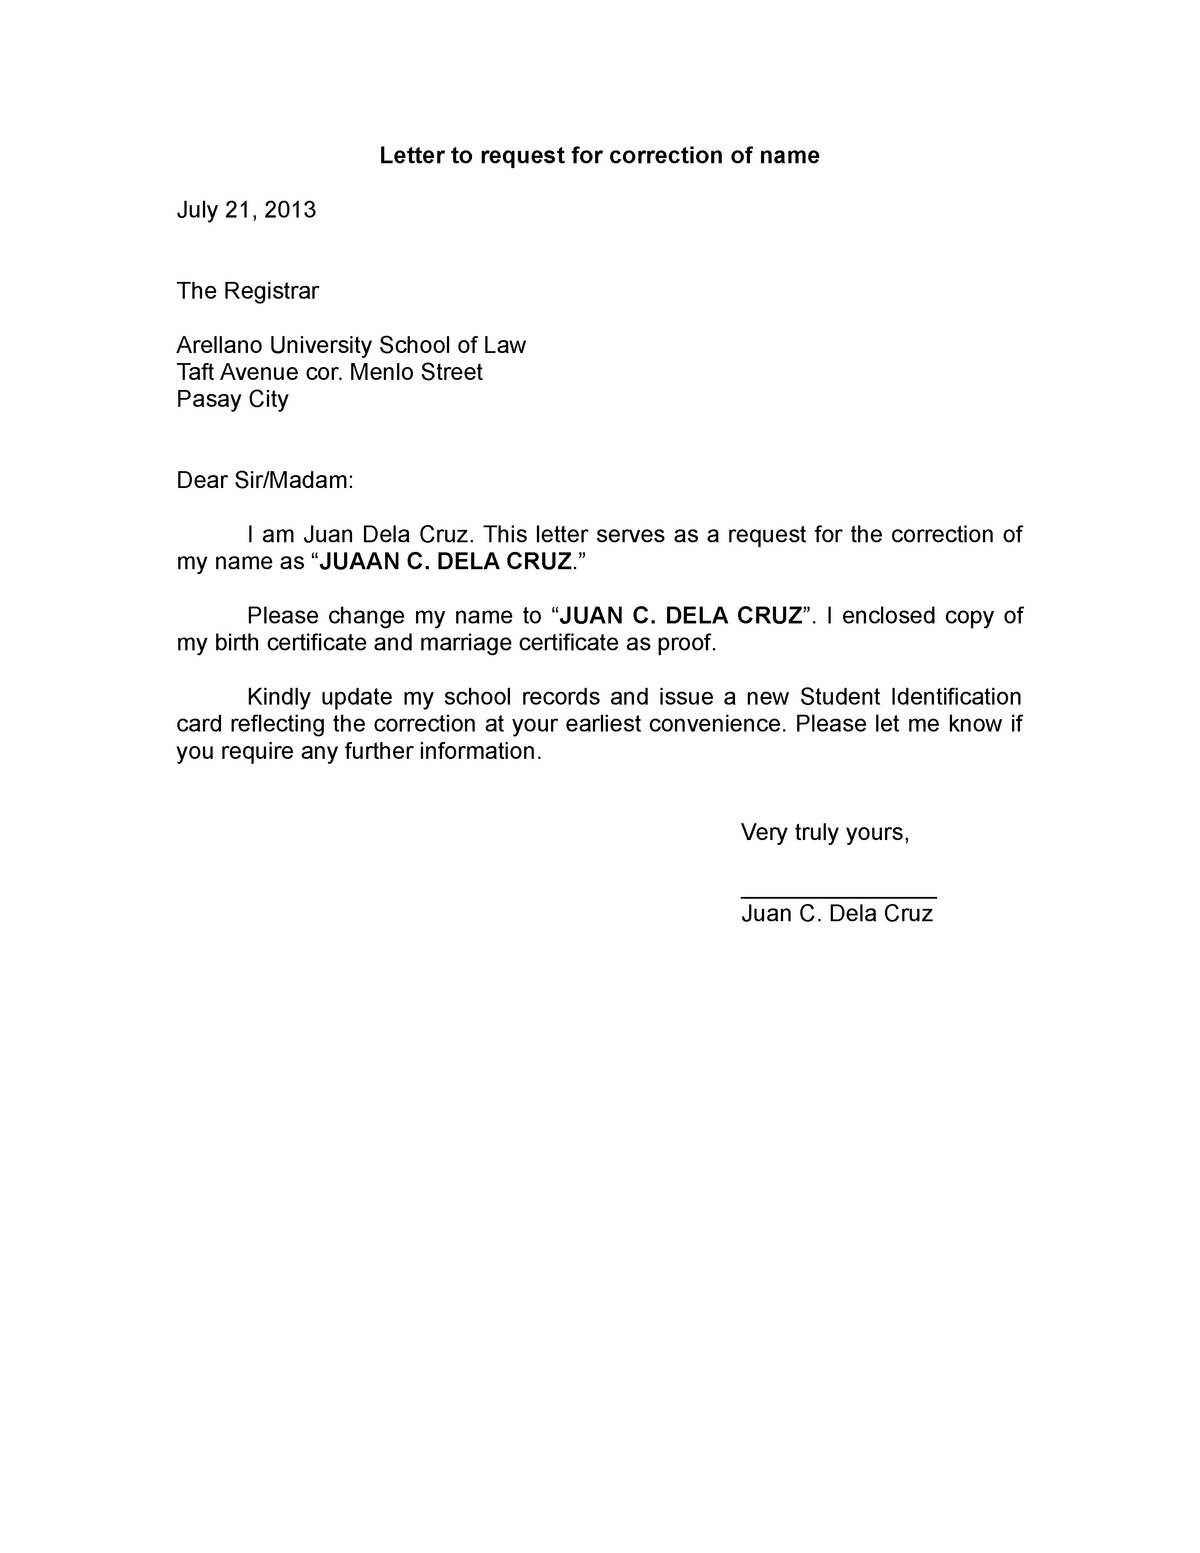 26 Letter Request for Correction of Name - Letter to